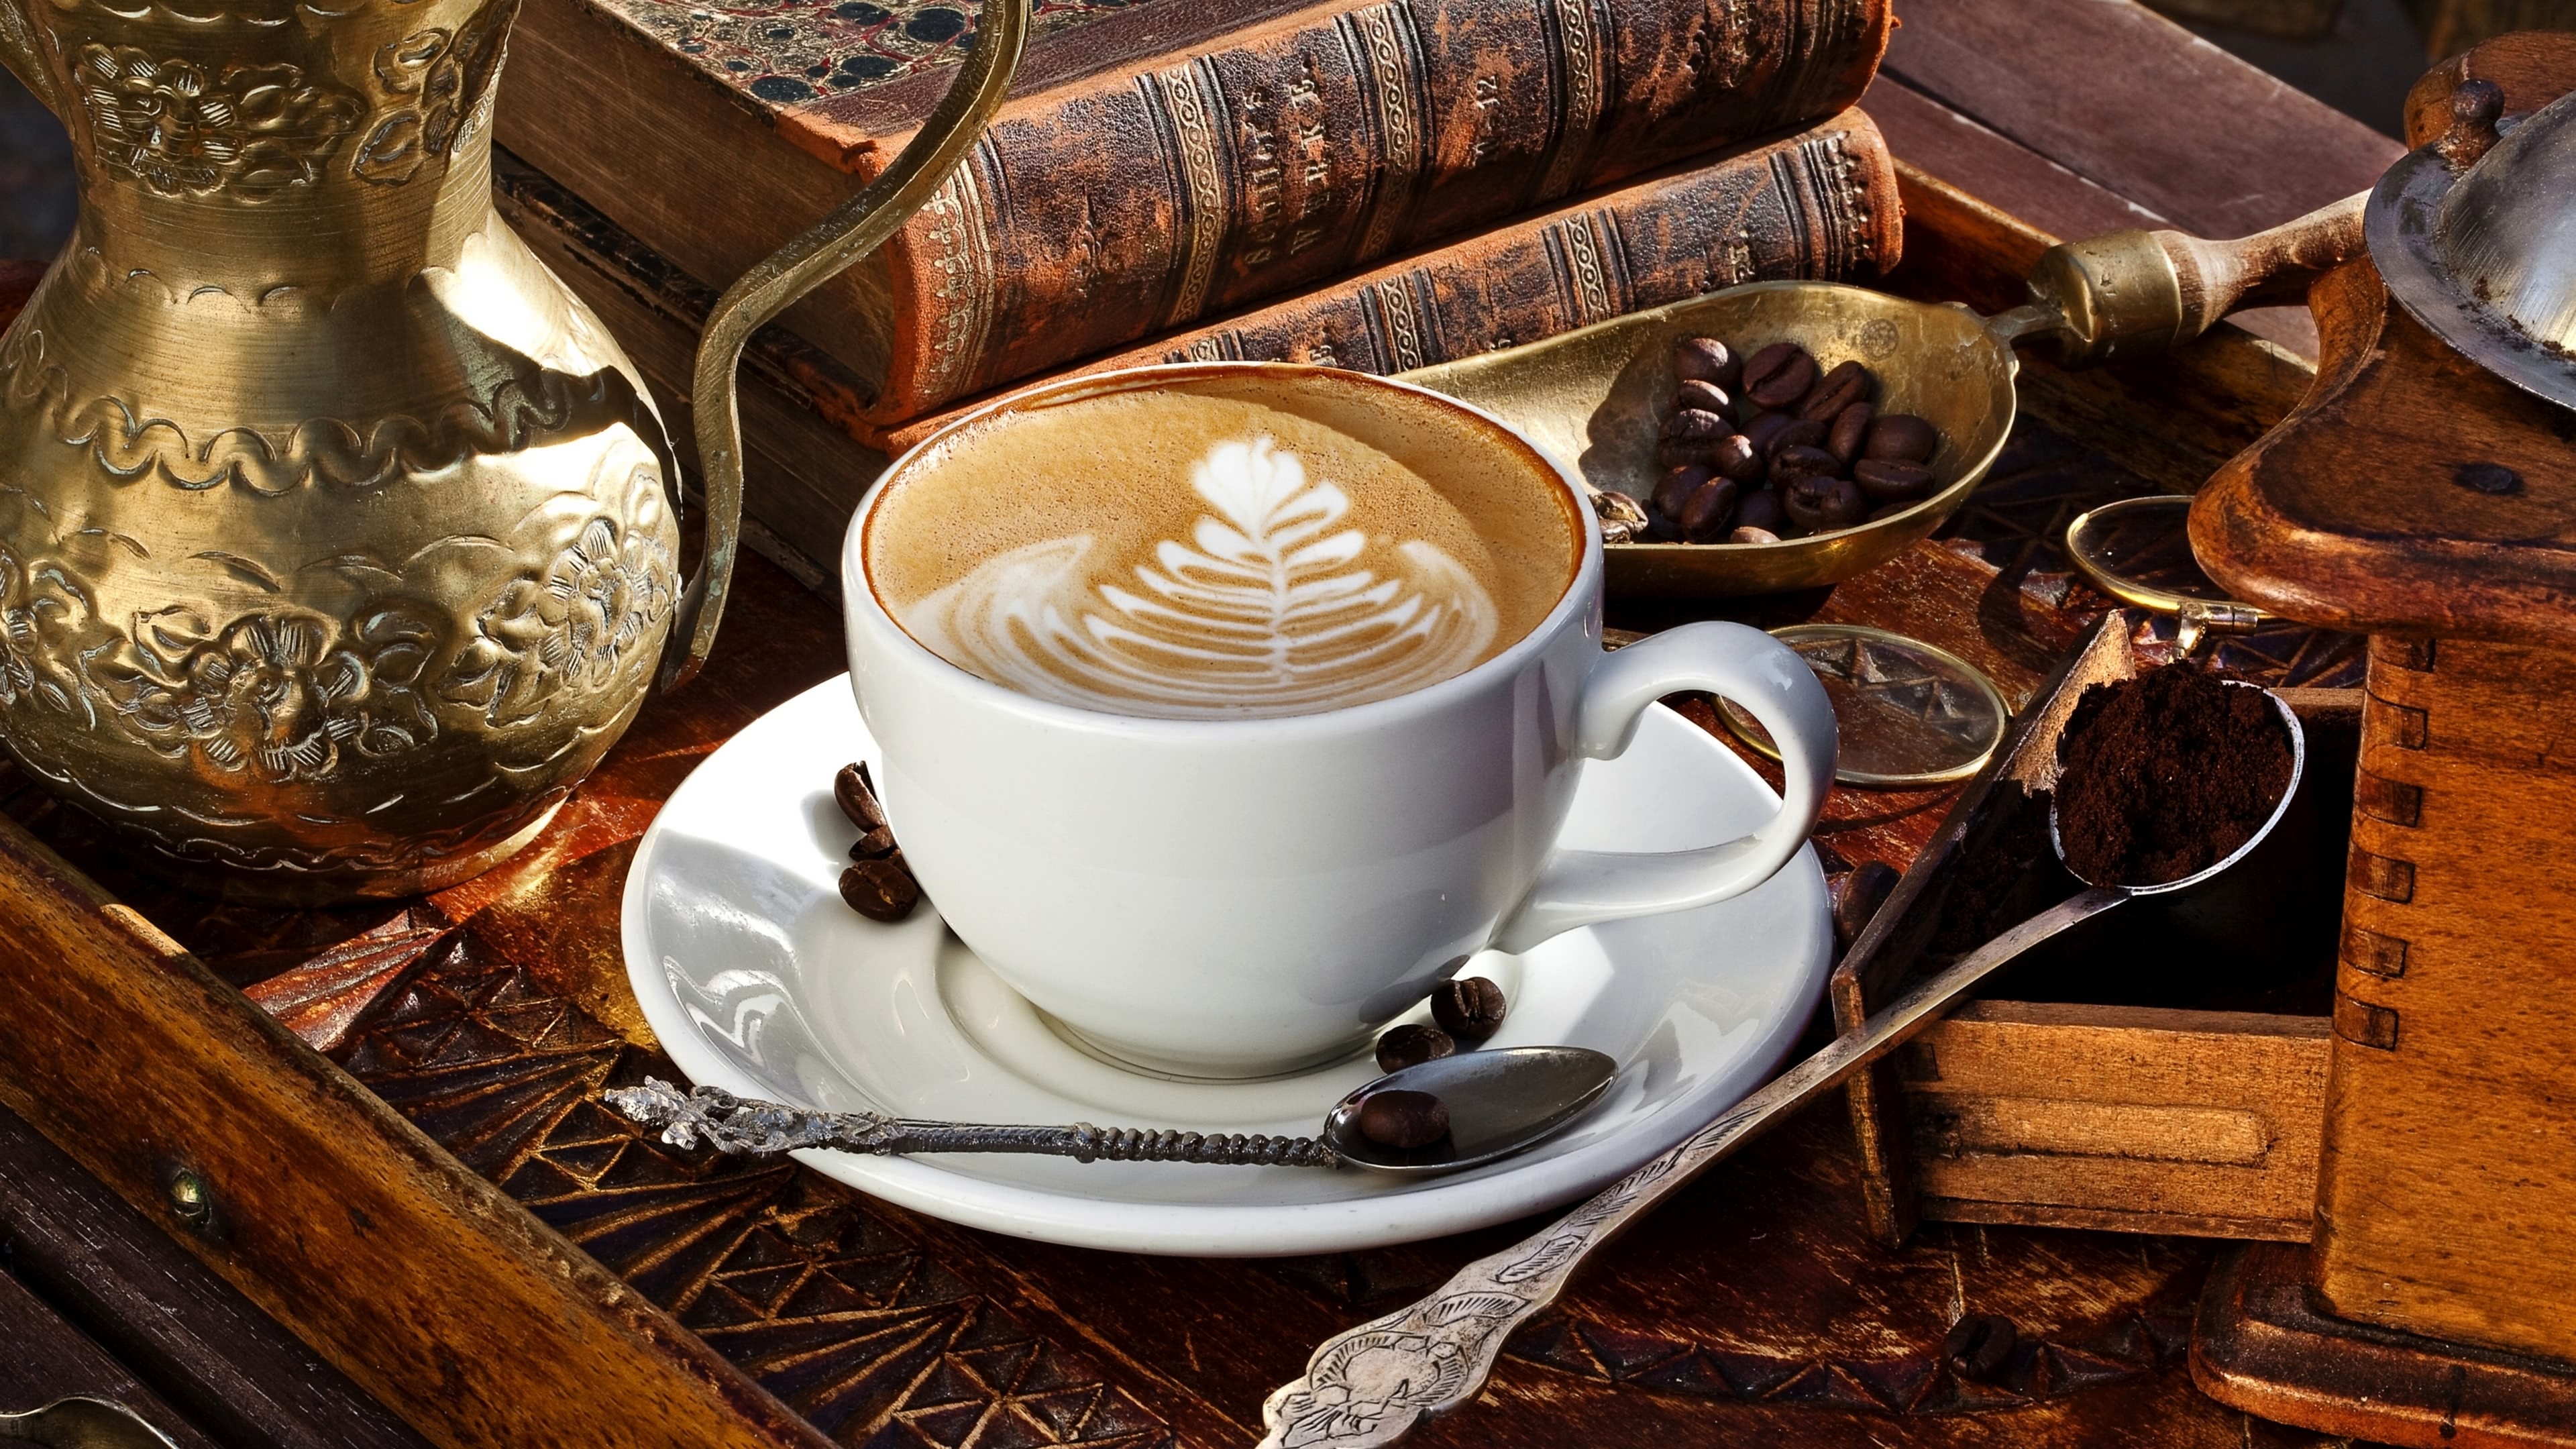 Coffee: Latte, Vintage books, A spoon and a cup, Atmospheric. 3840x2160 4K Wallpaper.